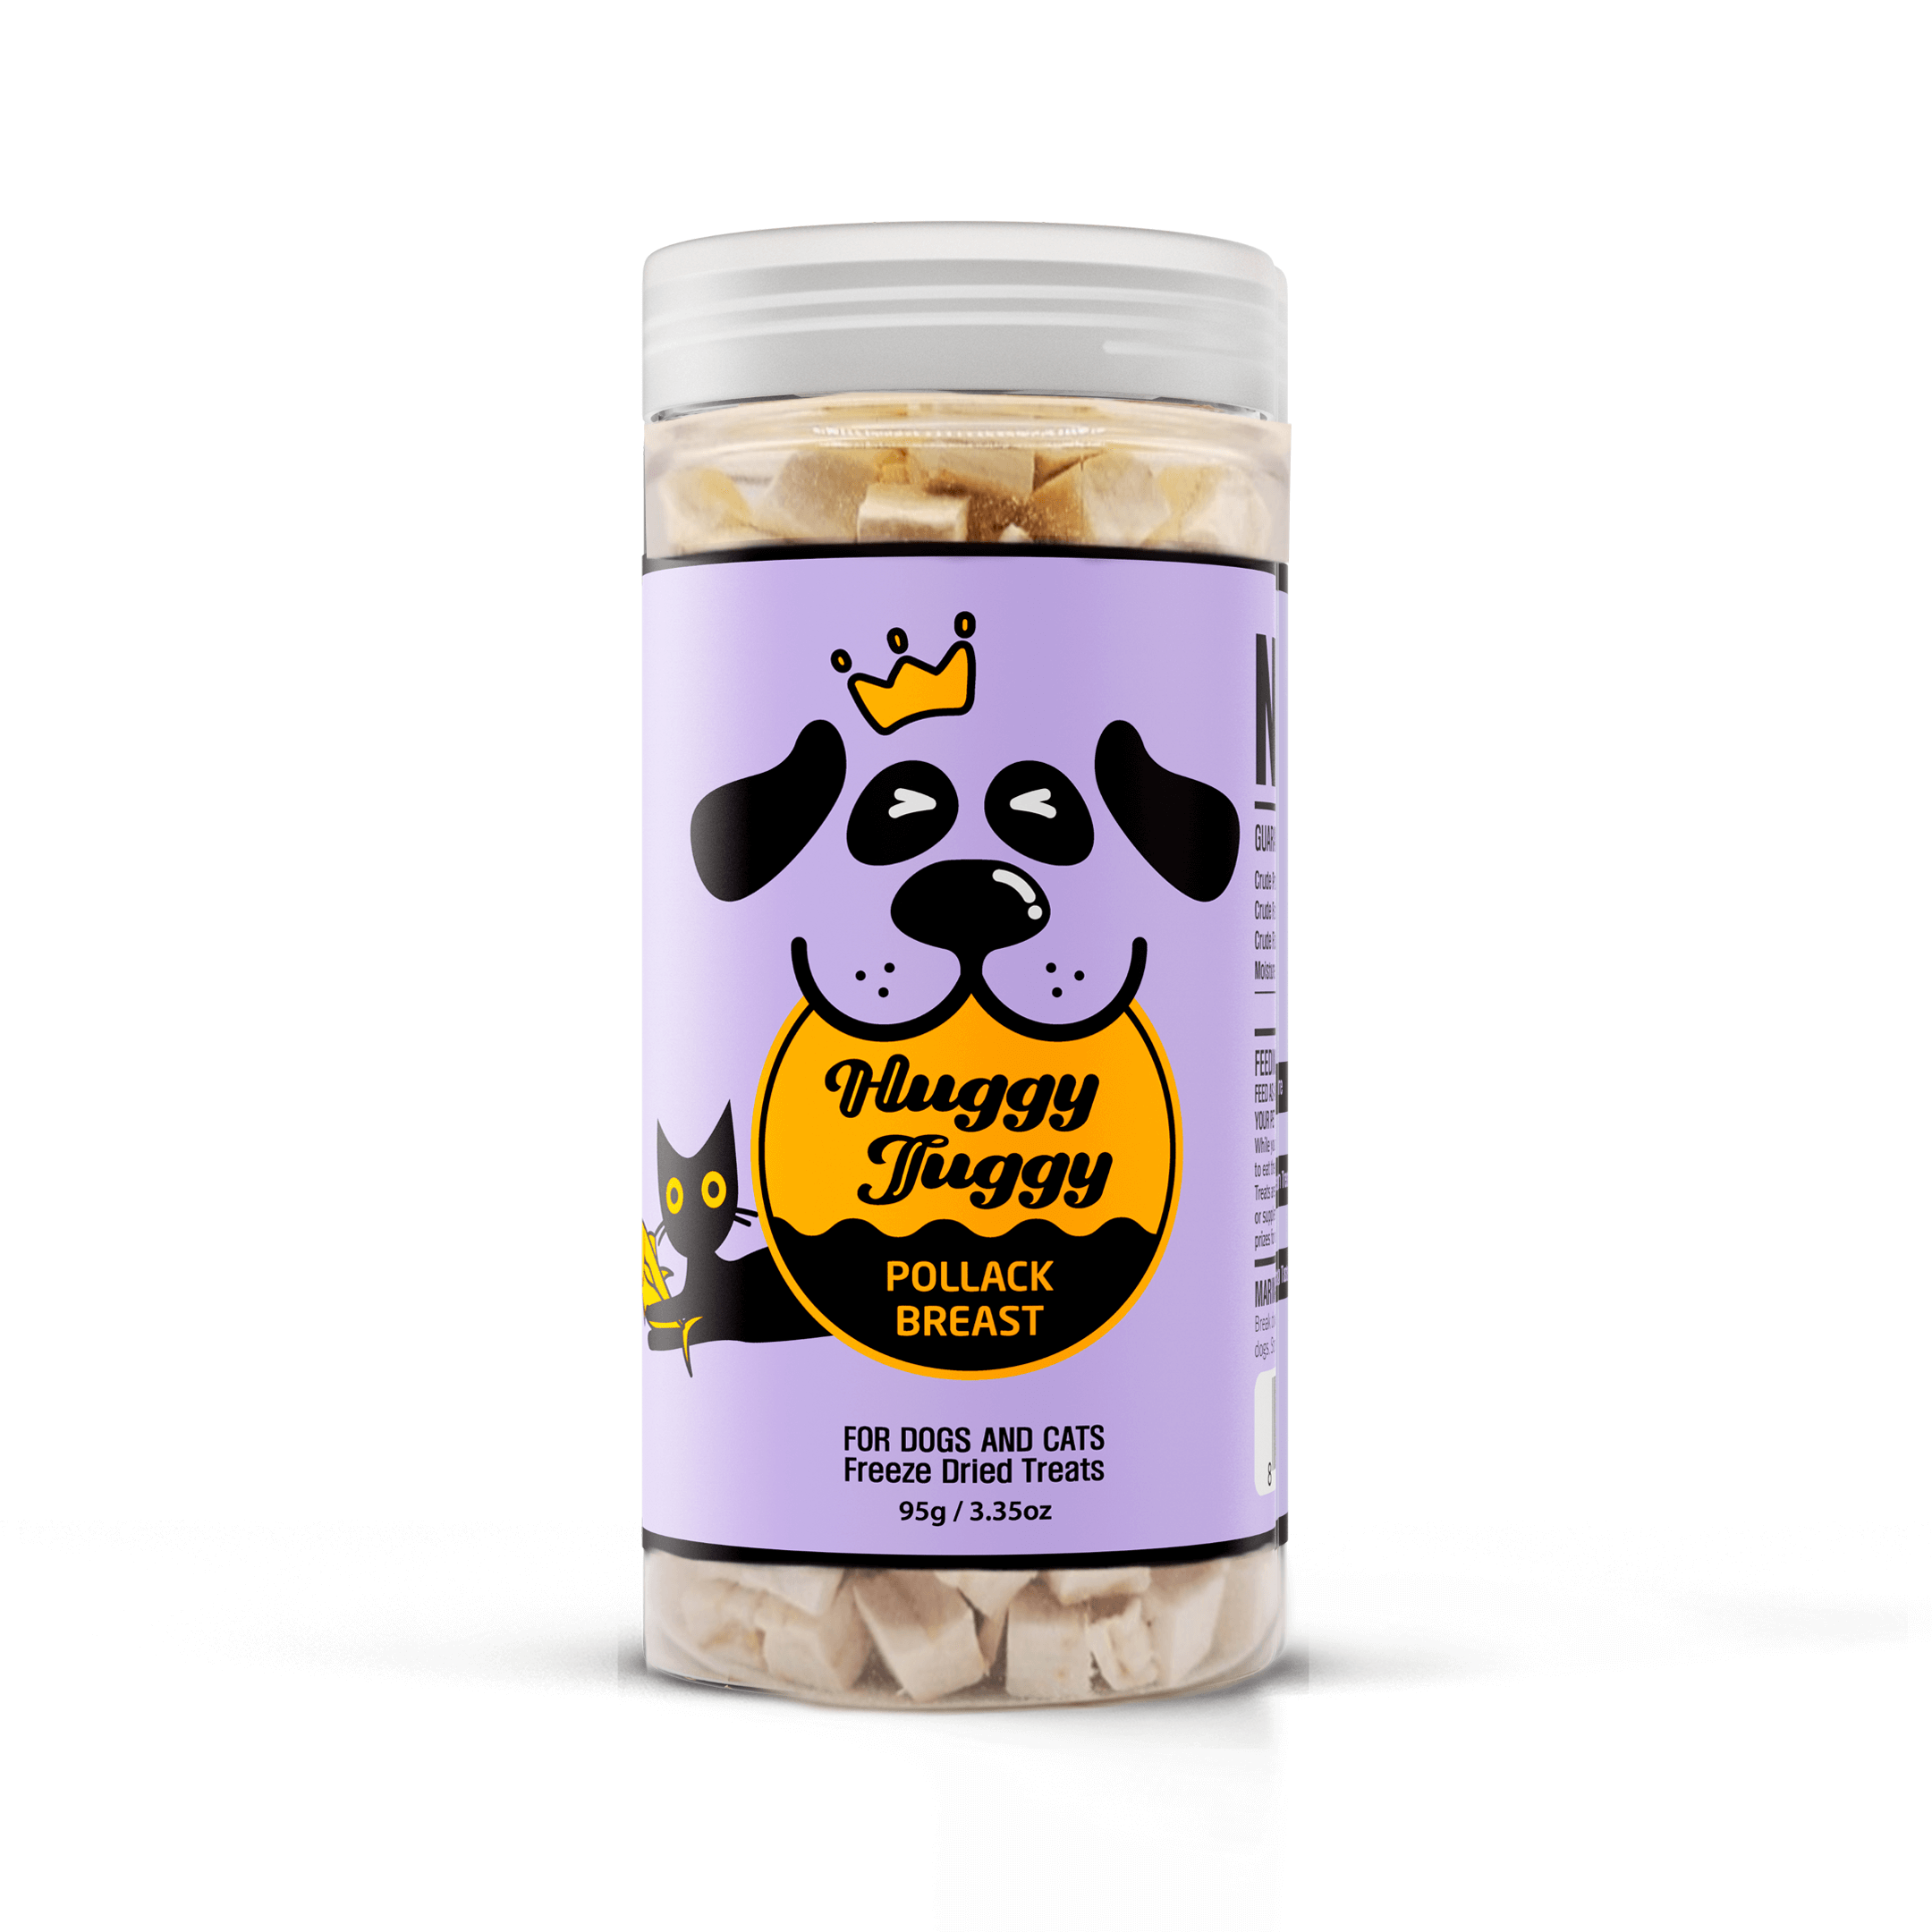 Huggy Tuggy Freeze-Dried Pollack Treats for Dogs and Cats - Natural Single Ingredient Pet Food, High Protein - No Fillers, Preservatives, or Additives - 3.35 Oz